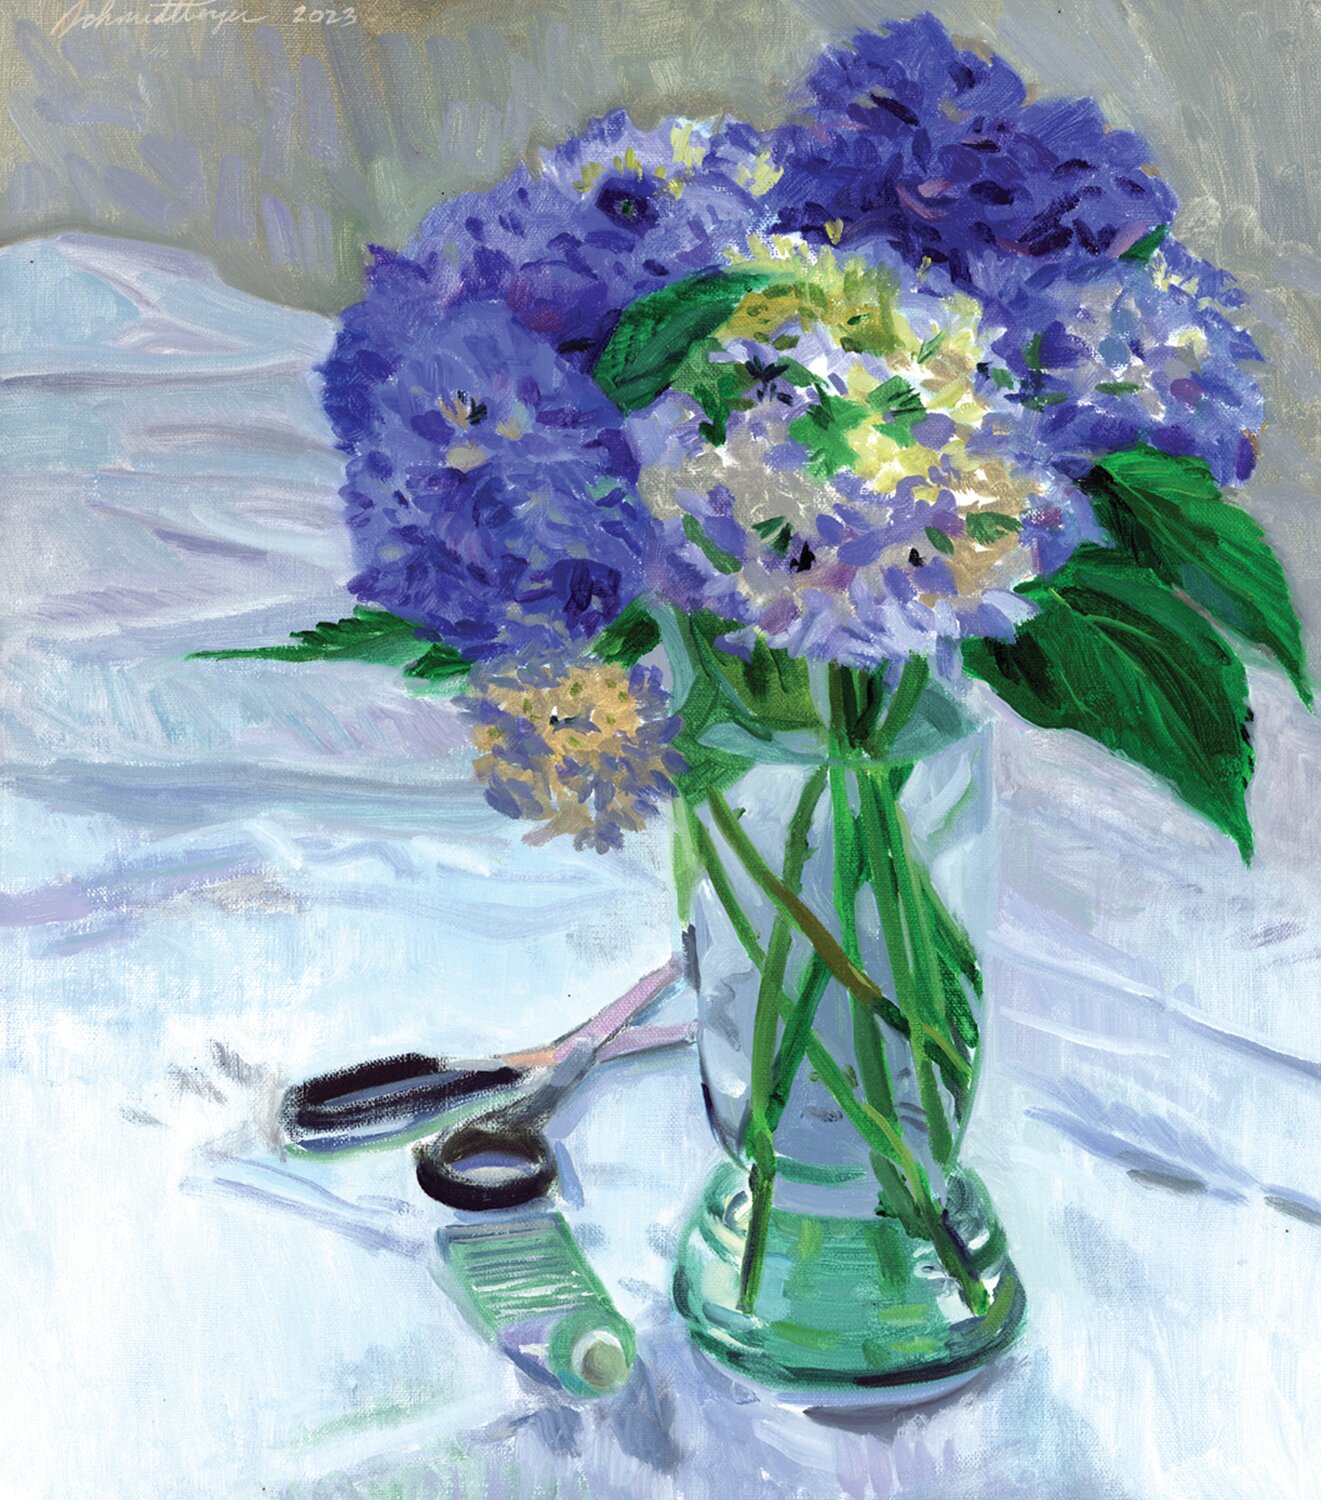 “Hydrangea, Scissors and Paint Tube” is an 18- by 16-inch oil on canvas by John Schmidtberger.